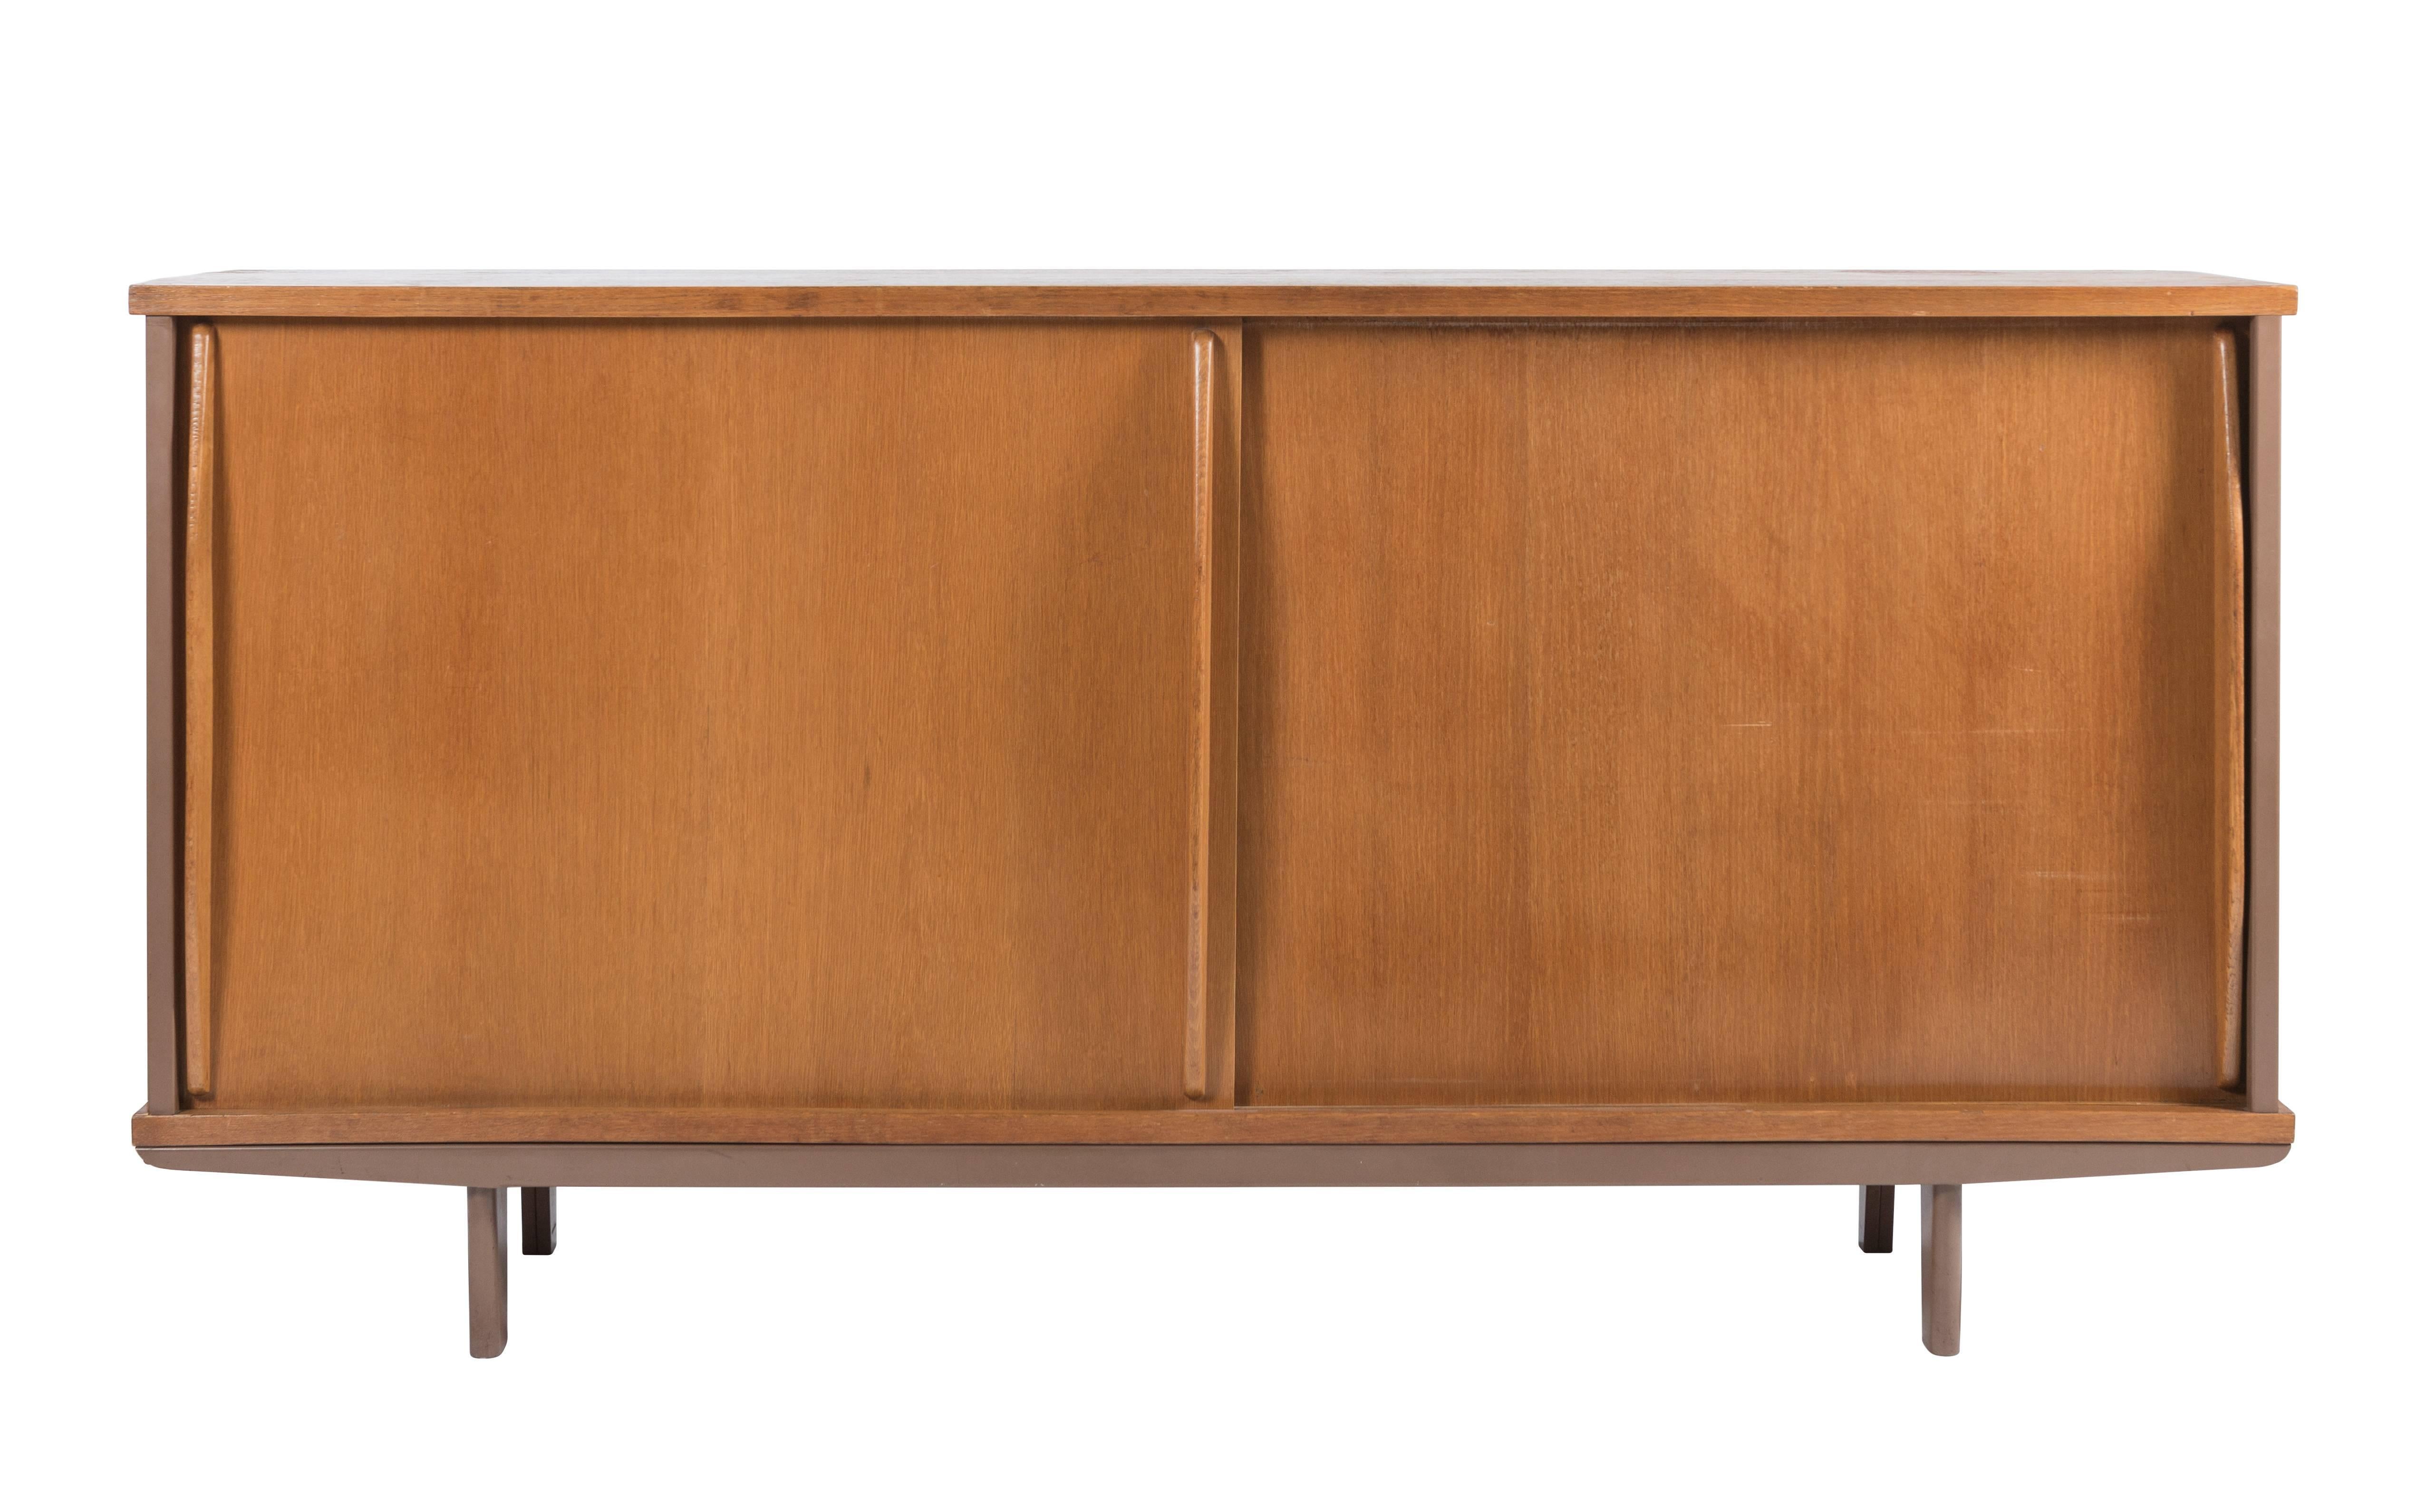 A very rare Prouvé cabinet model # 150 manufactured by 